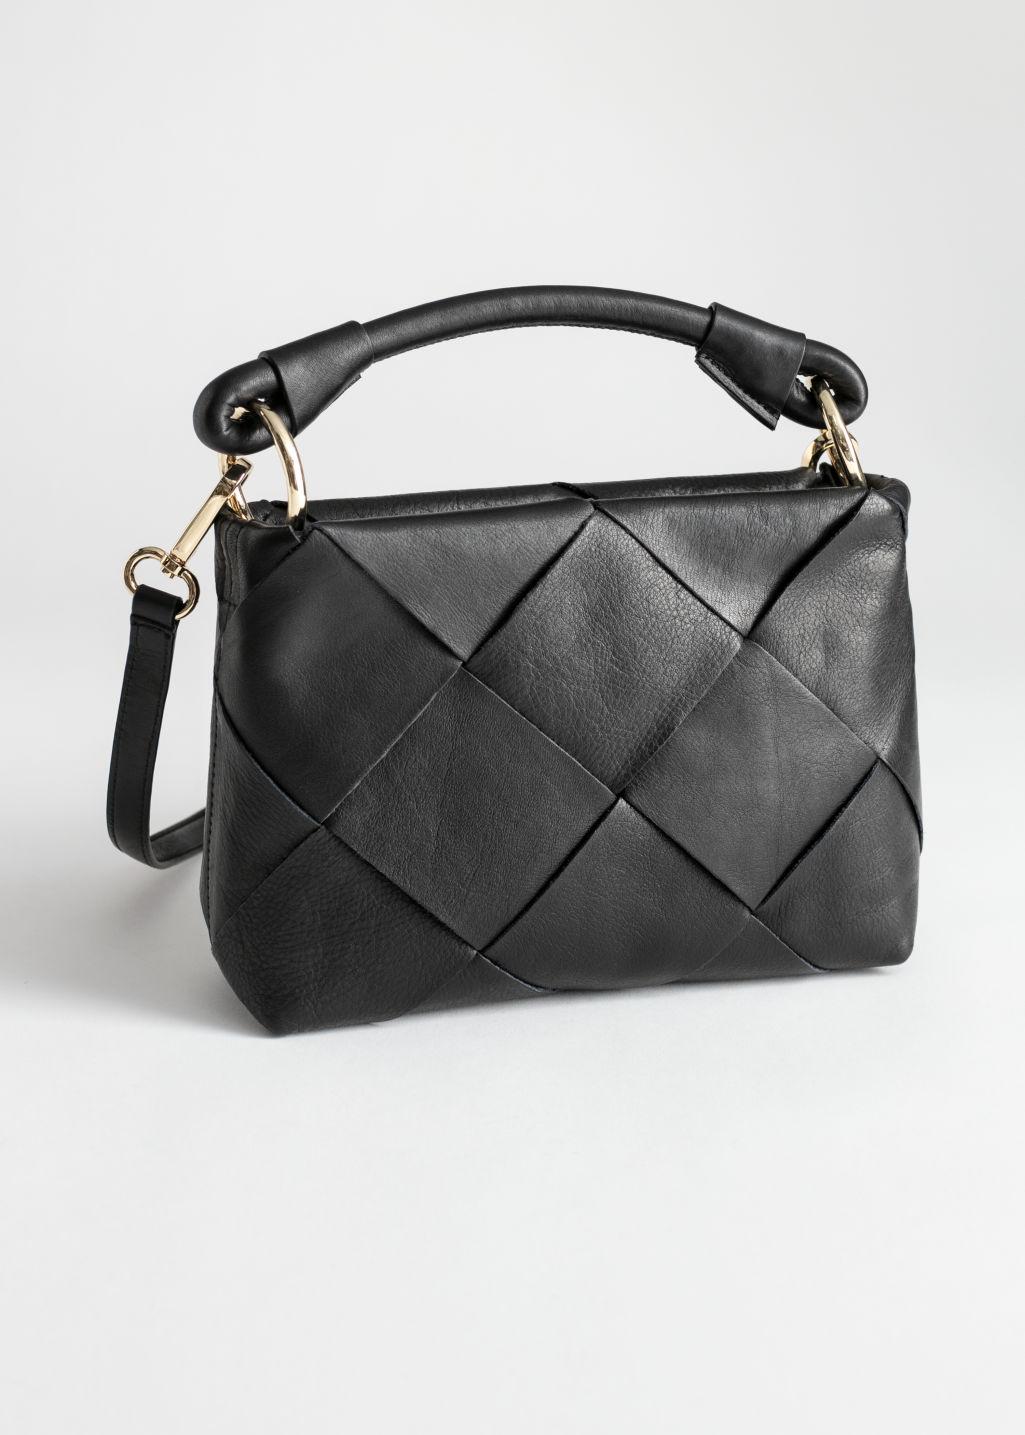 & Other Stories Braided Leather Crossbody Bag in Black | Lyst